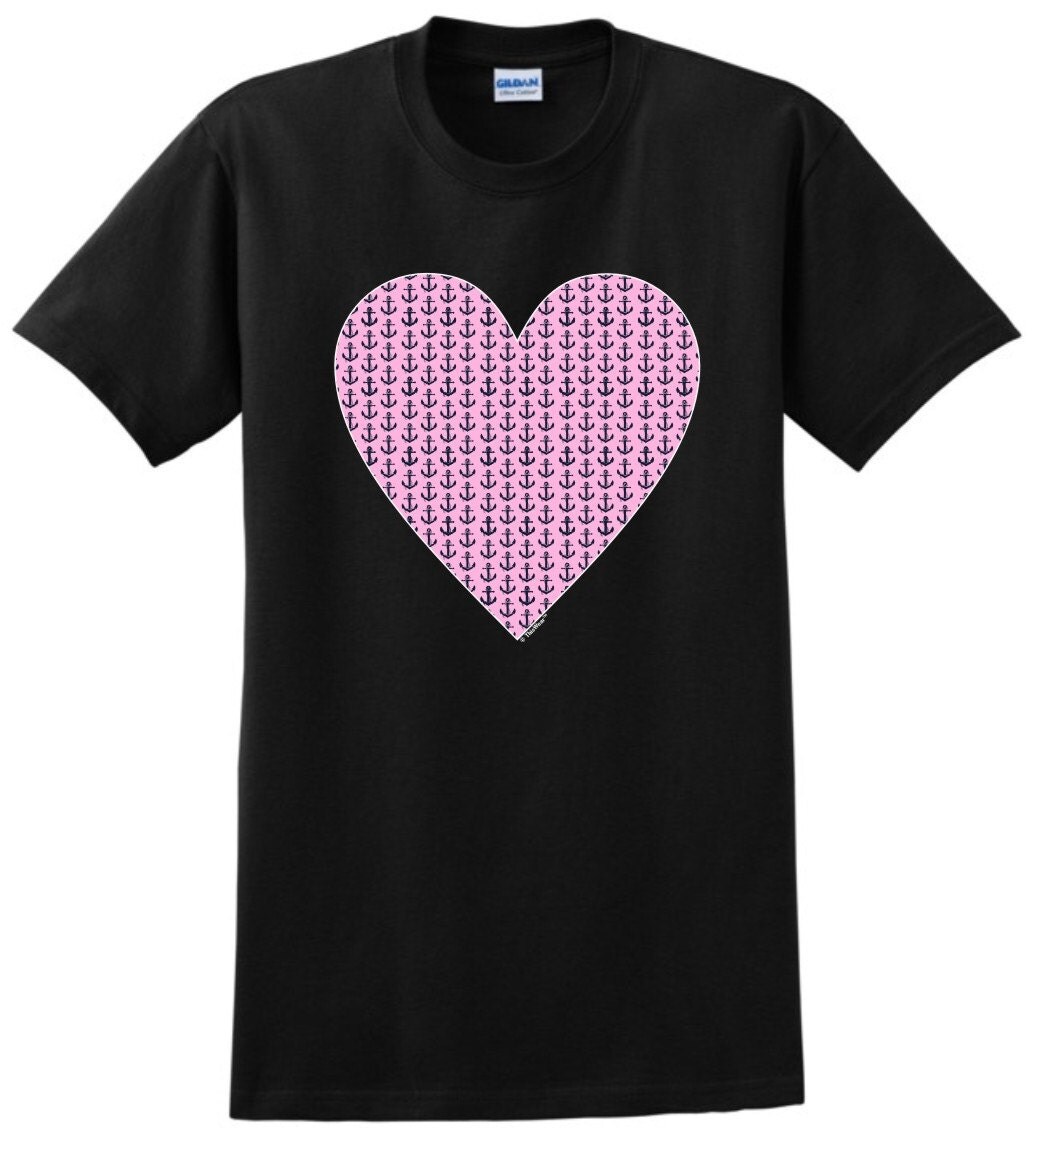 Preppy Heart Pink with blue anchors T-Shirt 2000 WHS-307